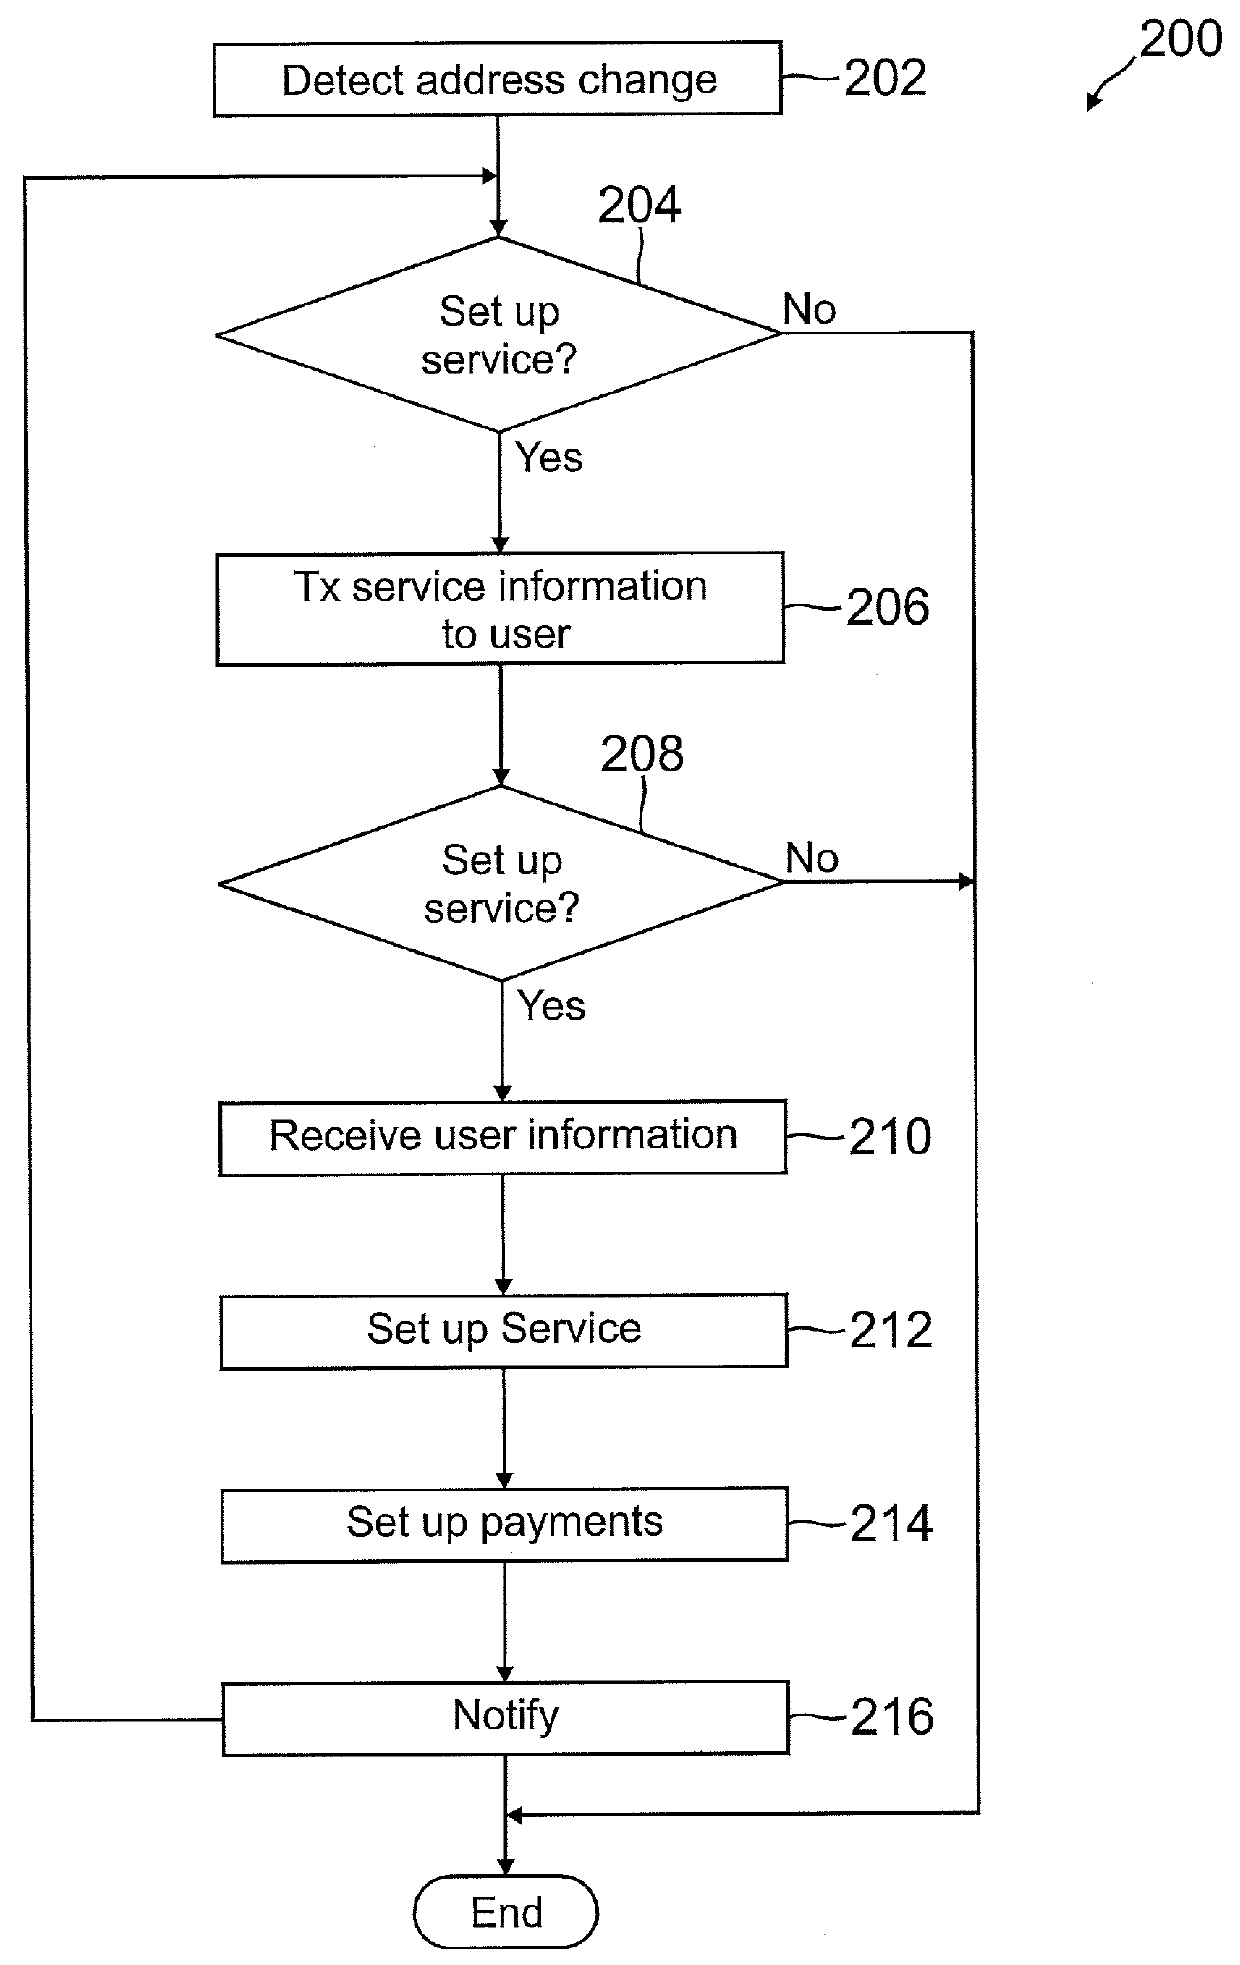 Location-based service payment and setup